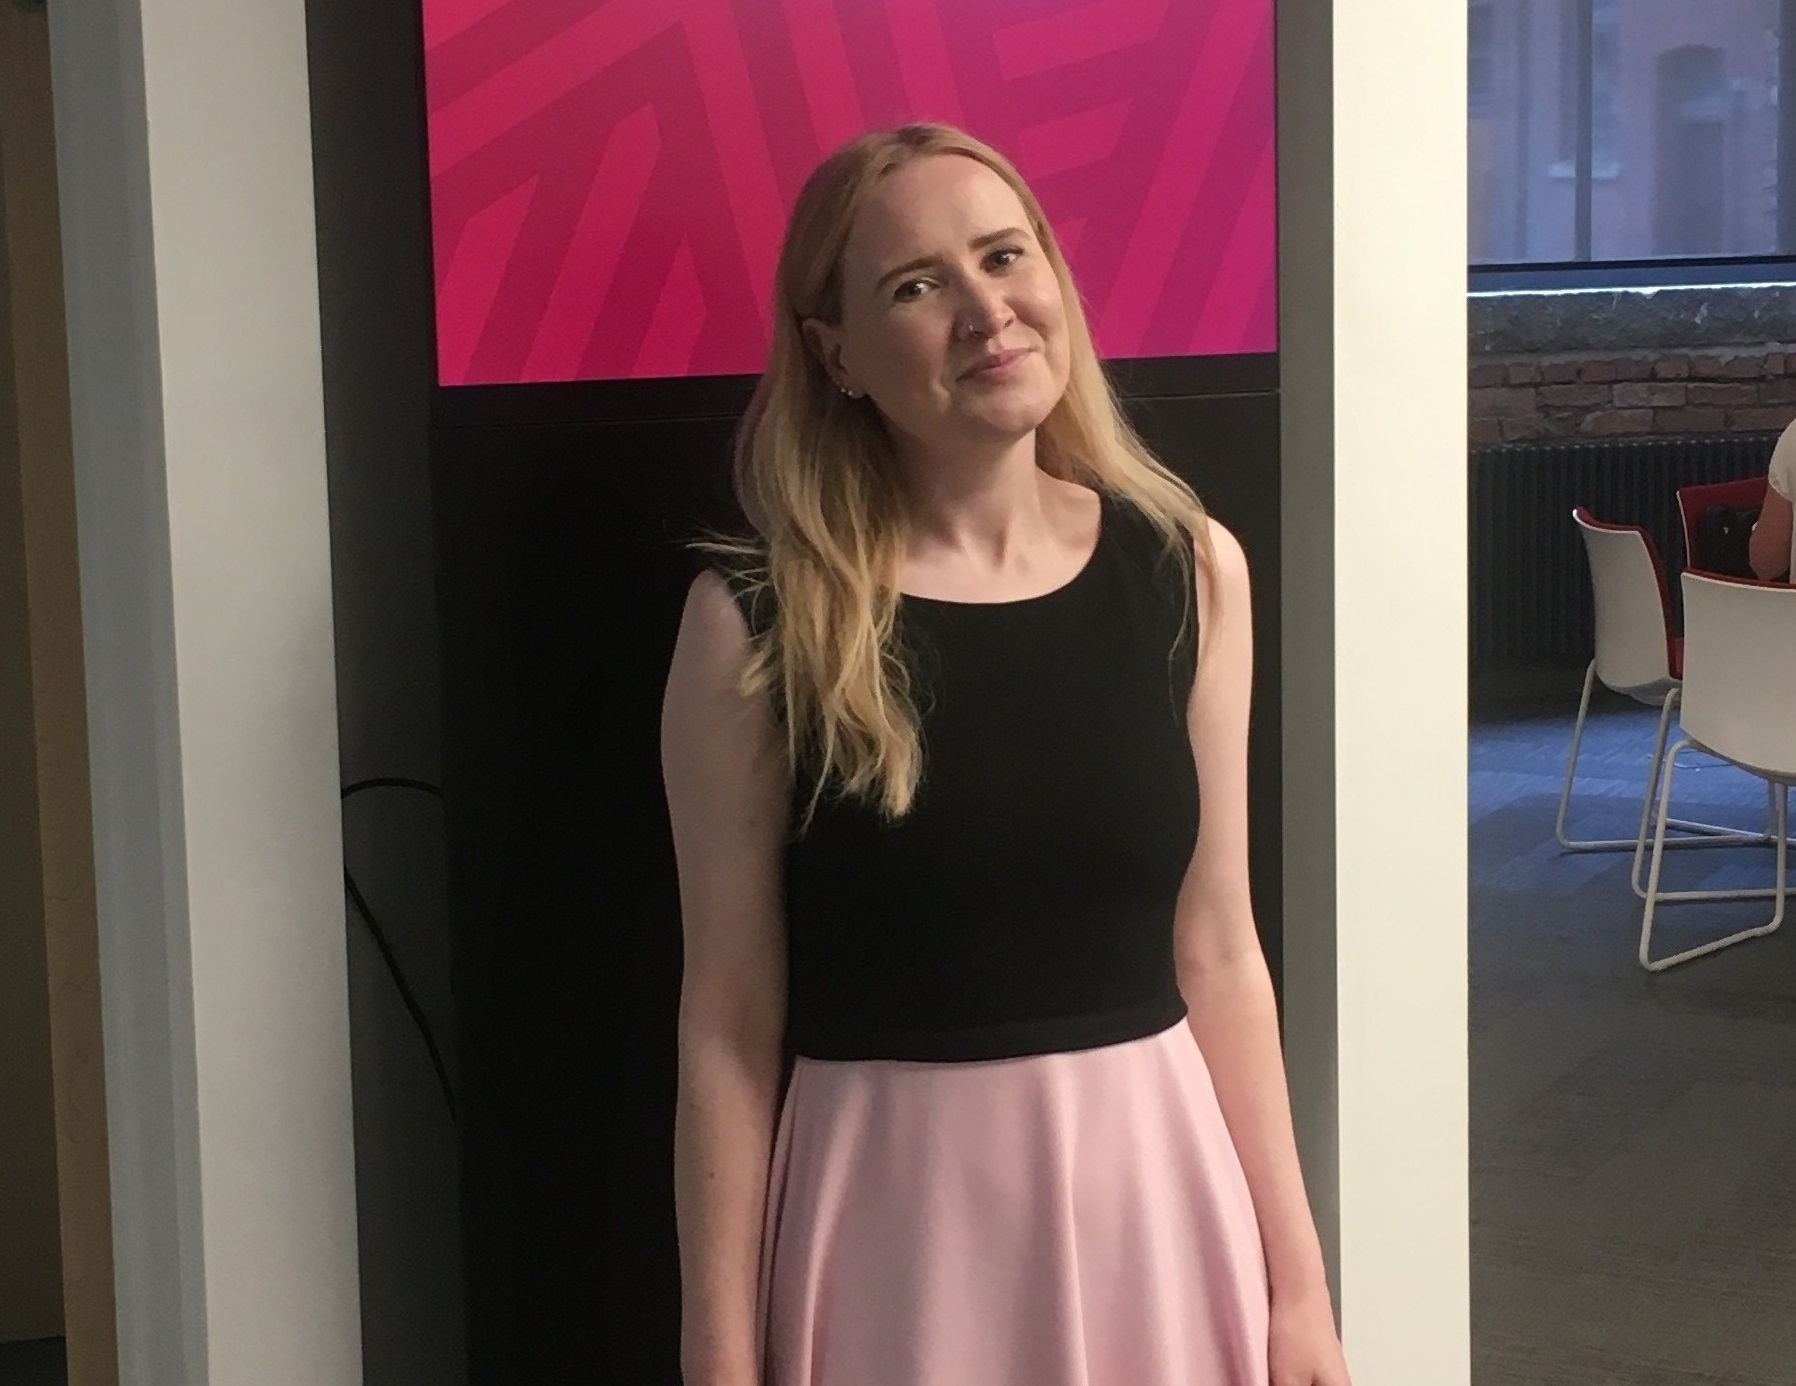 Laura smiling for a photo, in a black and pink dress